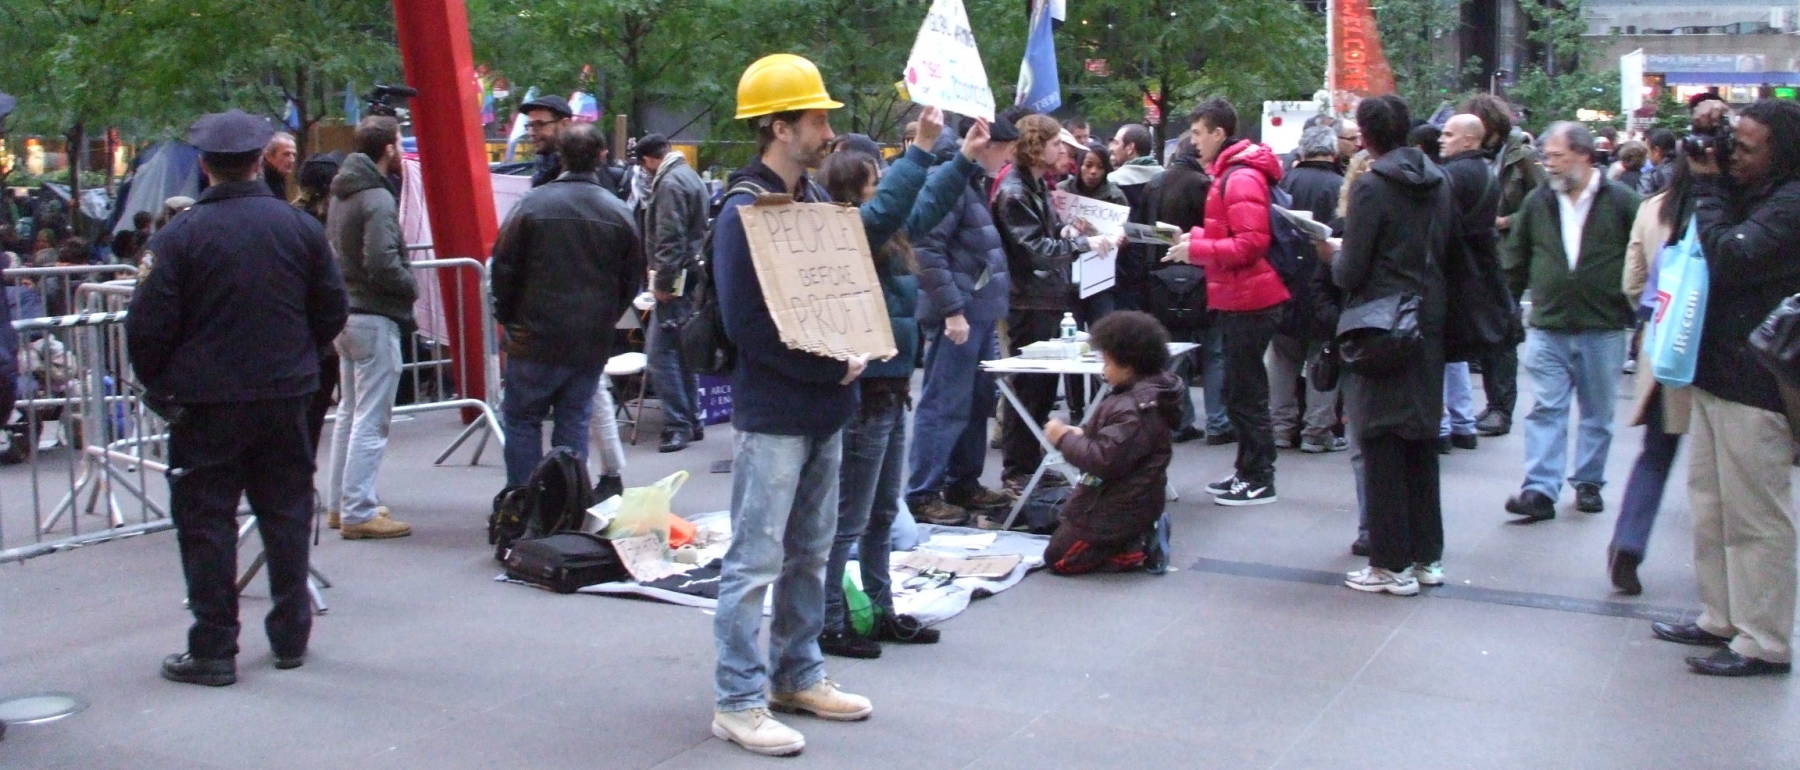 Occupy Wall Street protesters: man in hard hat with 'People Before Profit' sign.